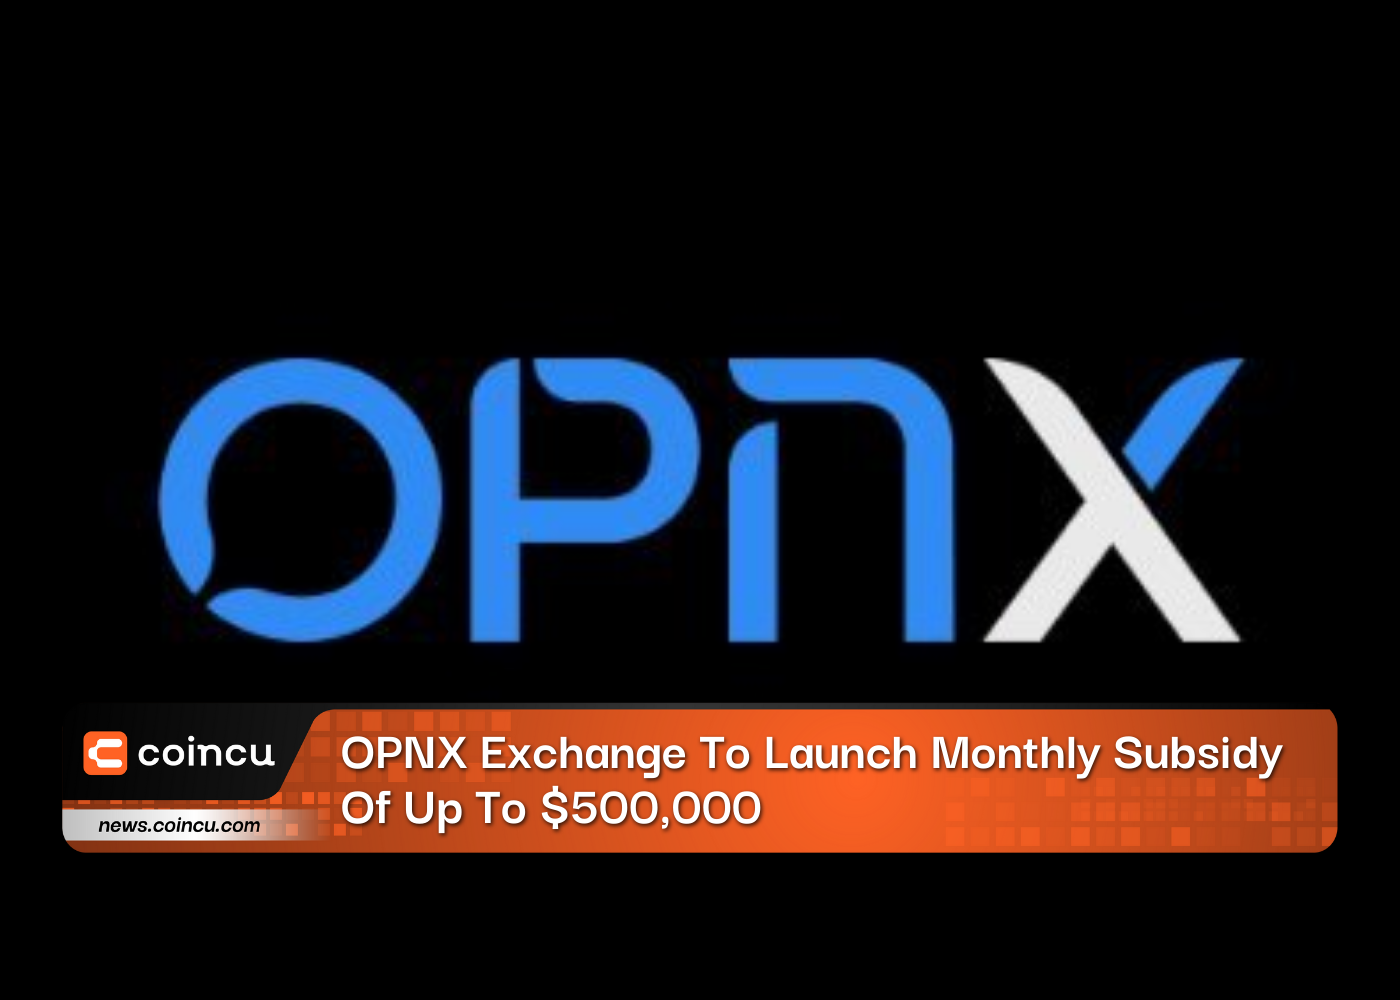 OPNX Exchange To Launch Monthly Subsidy Of Up To $500,000